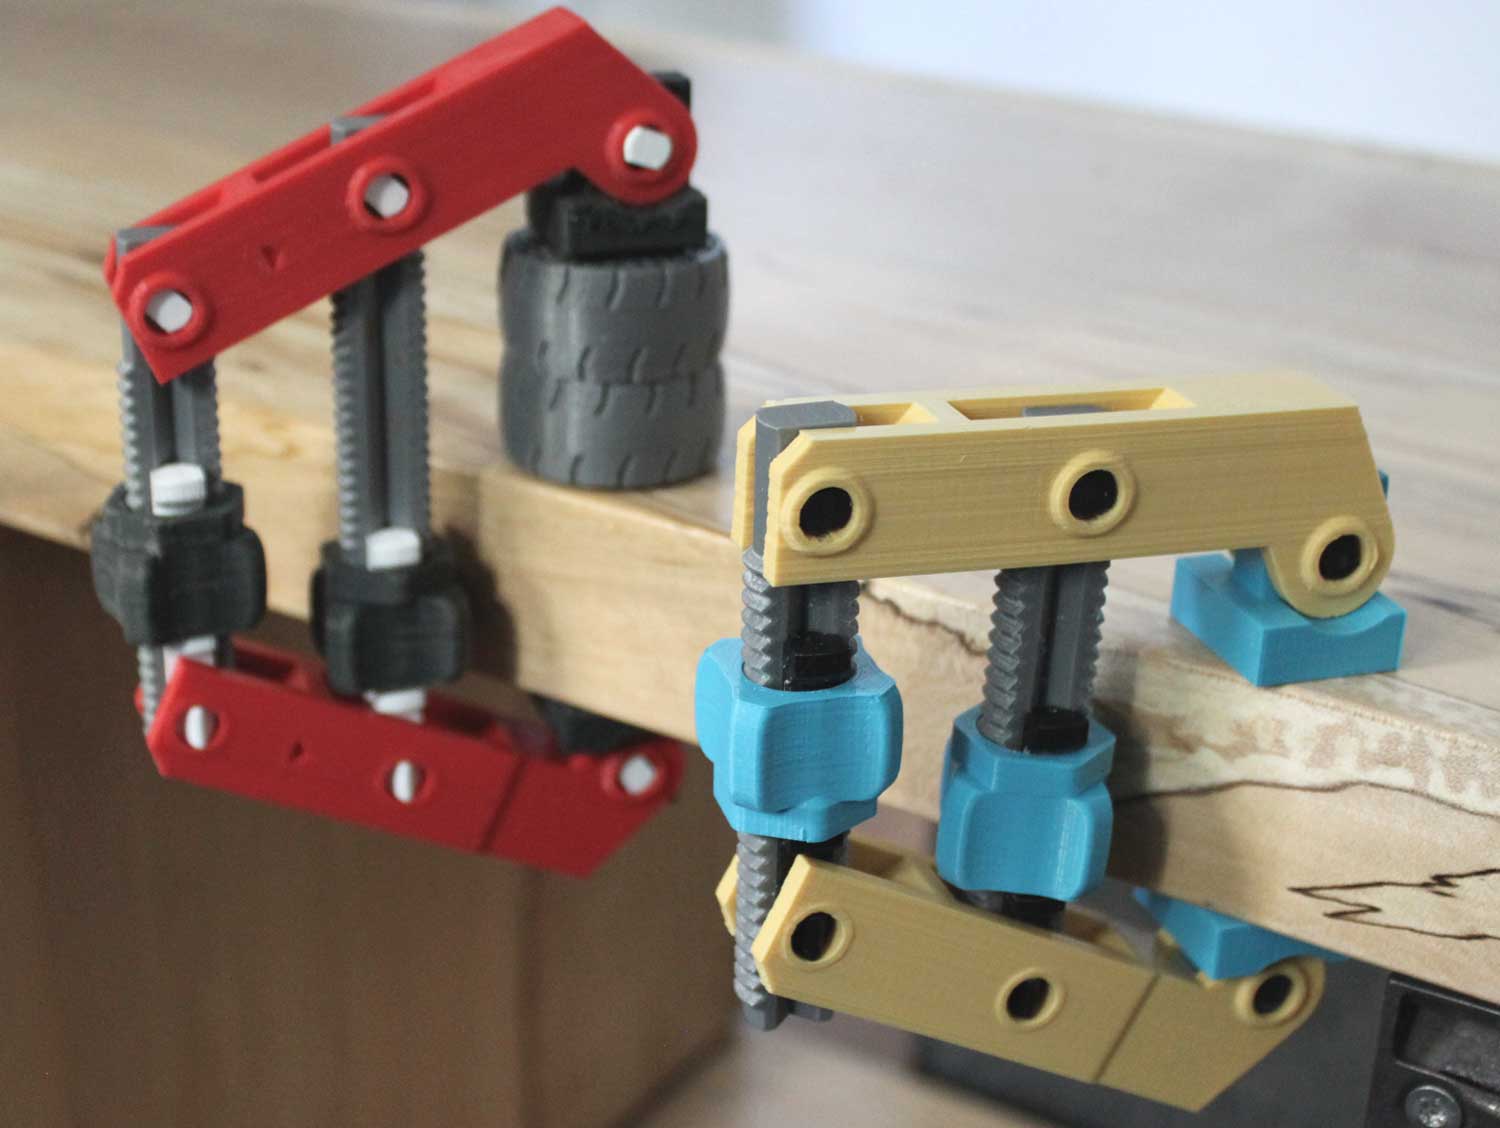  A 3D printed hand-screw clamp with the most unusual bolts 